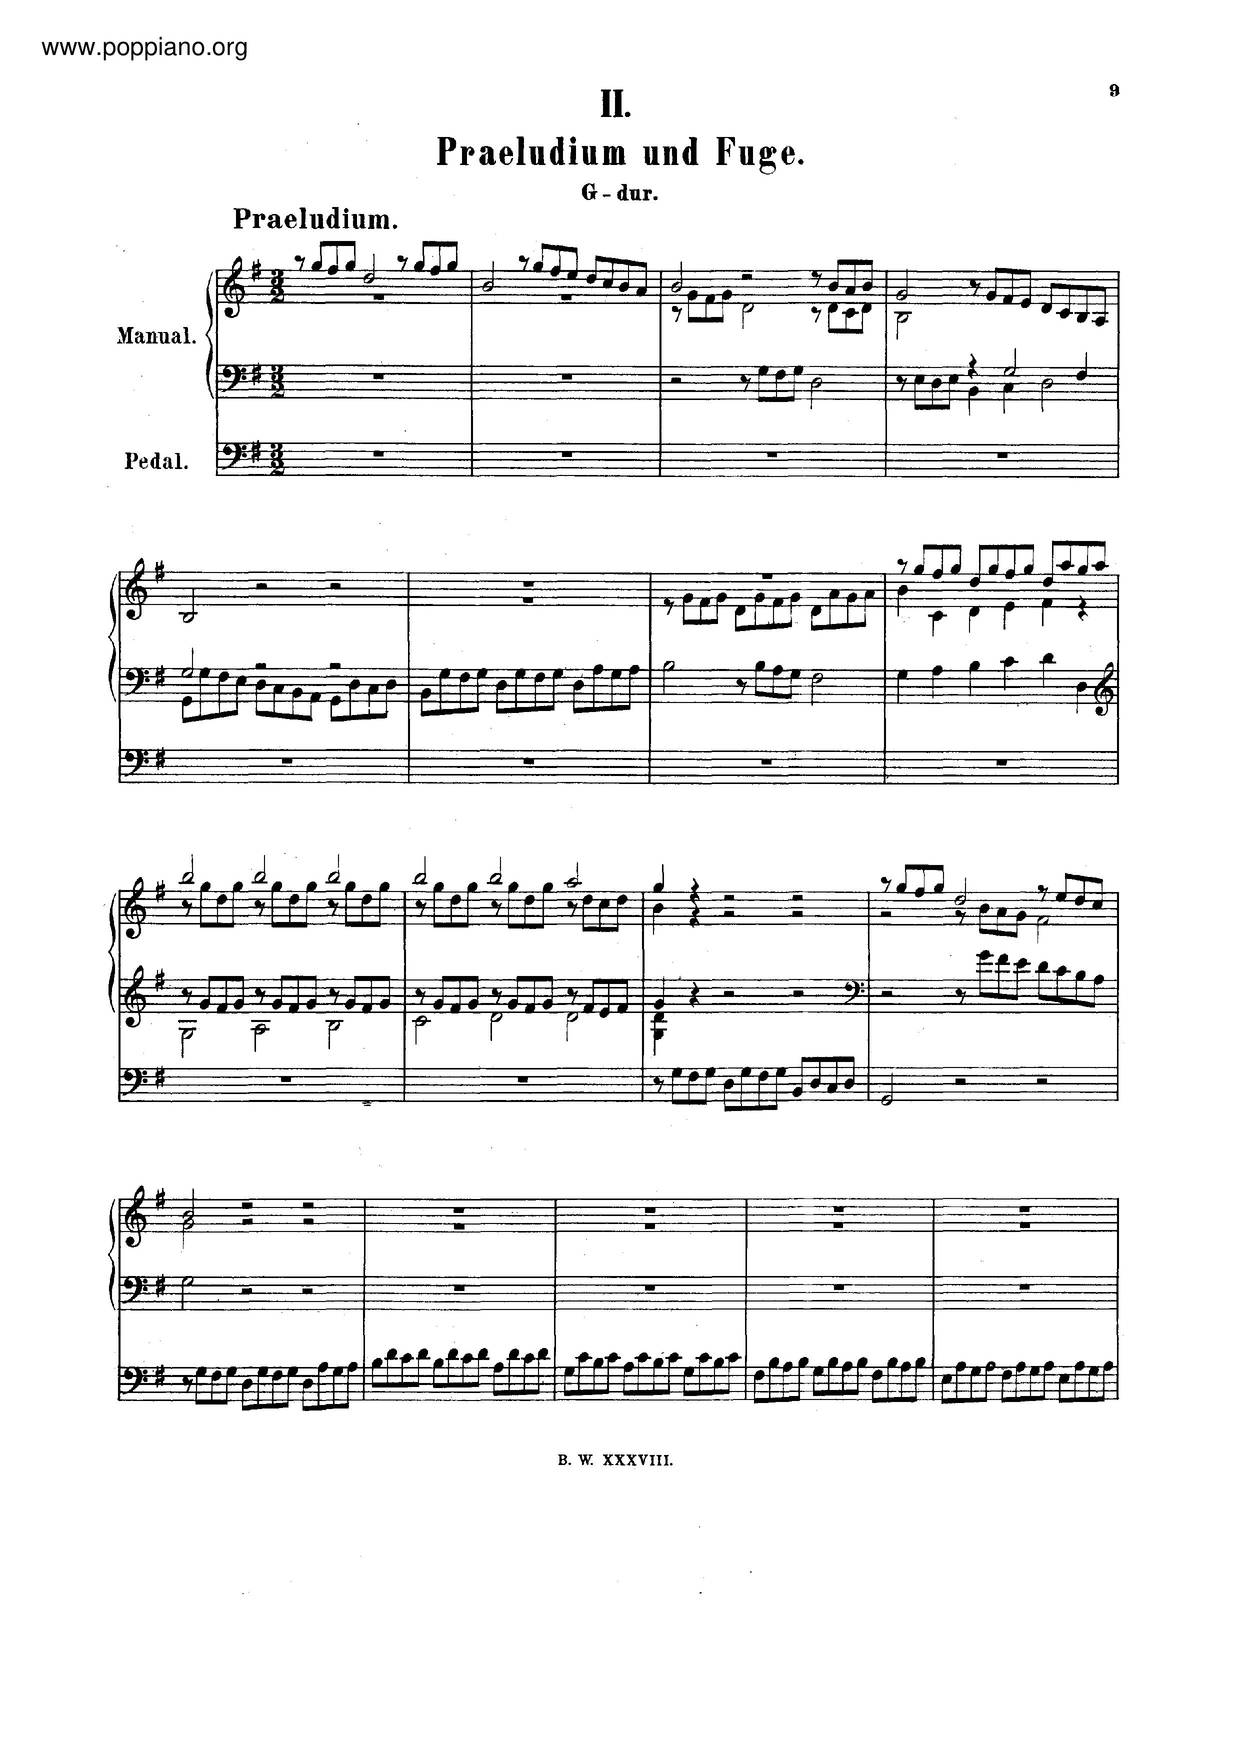 Prelude And Fugue In G Major, BWV 550 Score